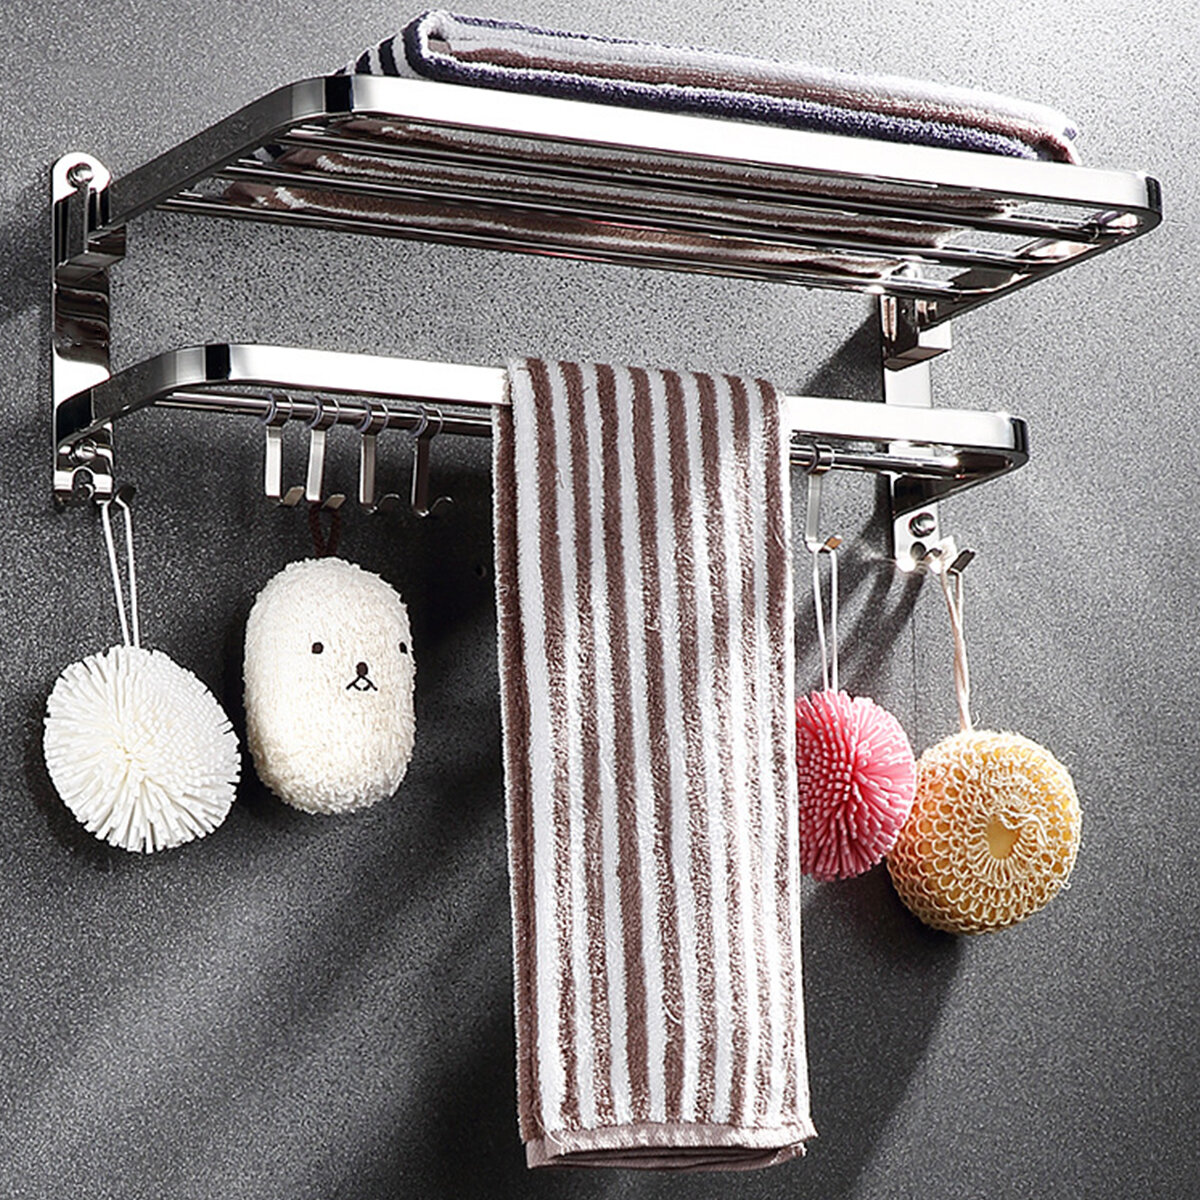 

BakeeyStainless Steel Perforated Towel Rack Double Shelf Strong Bearing Capacity For Home Hotel